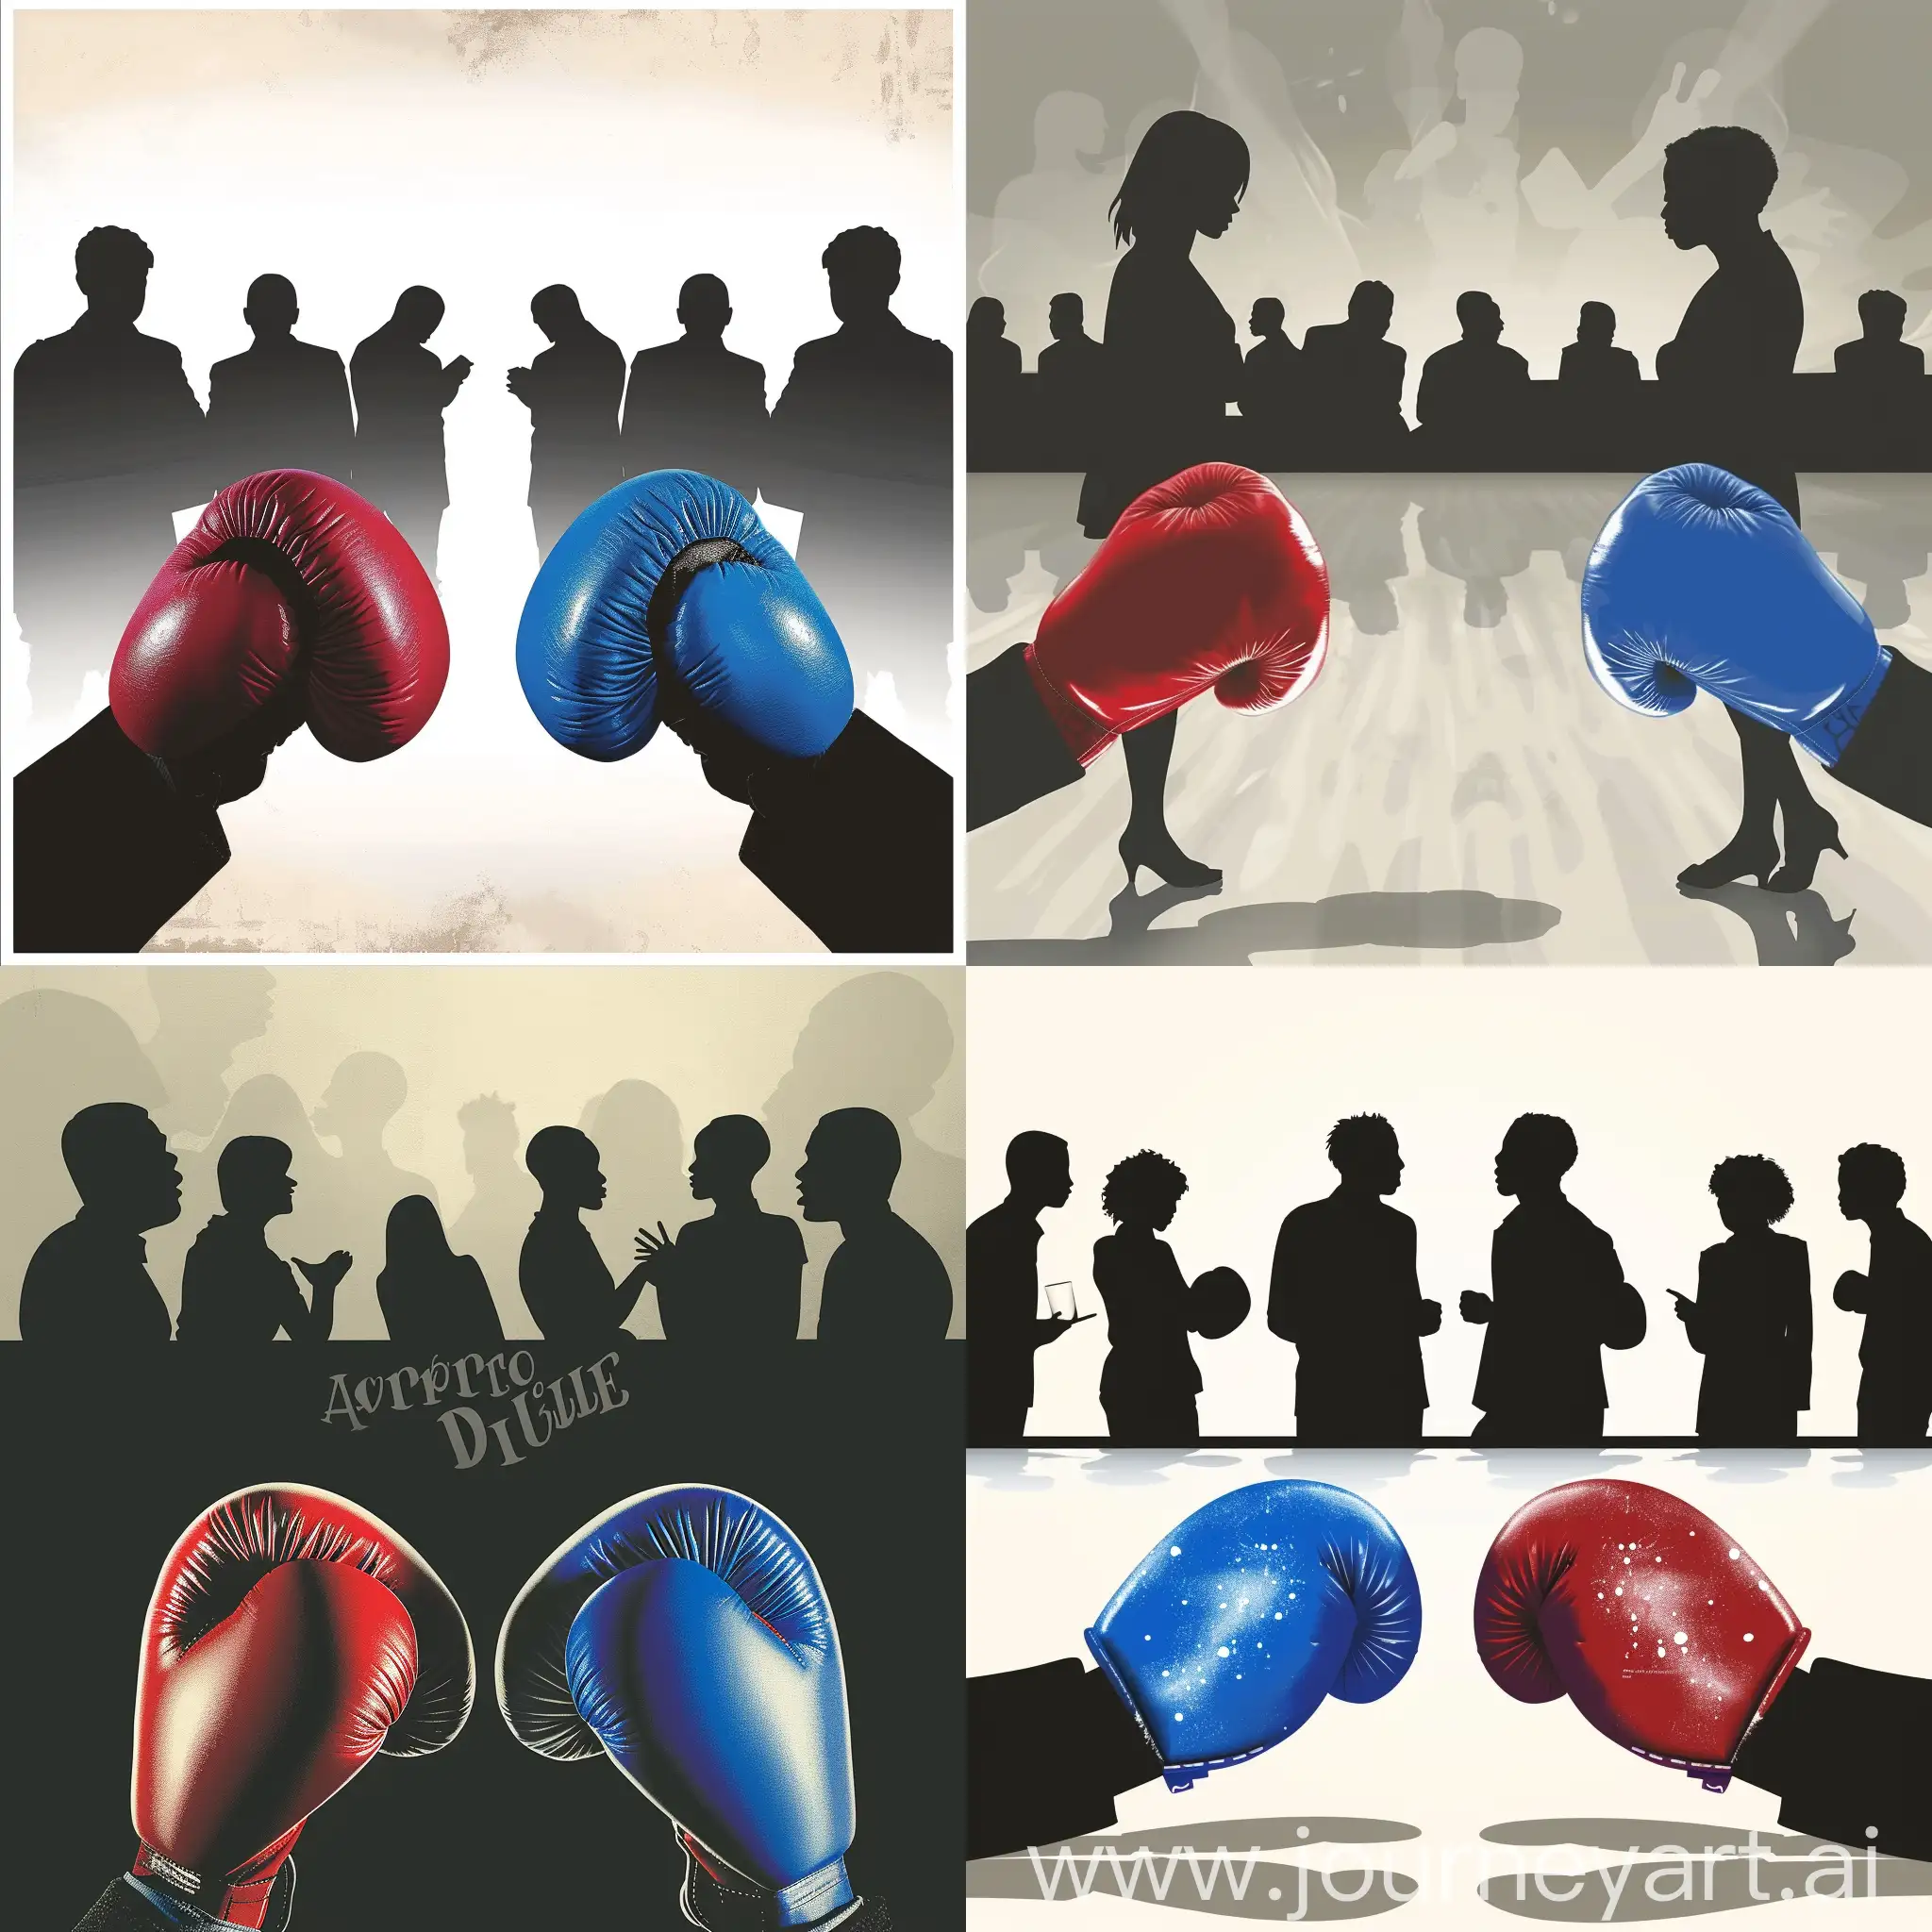 a poster, style realistic, about a debate meeting called Apero Dileme, where two ideas are fighting. I want to have two boxe gloves, red and blue, representing each opinion. I want silouette of black people in backgroung discussing 
